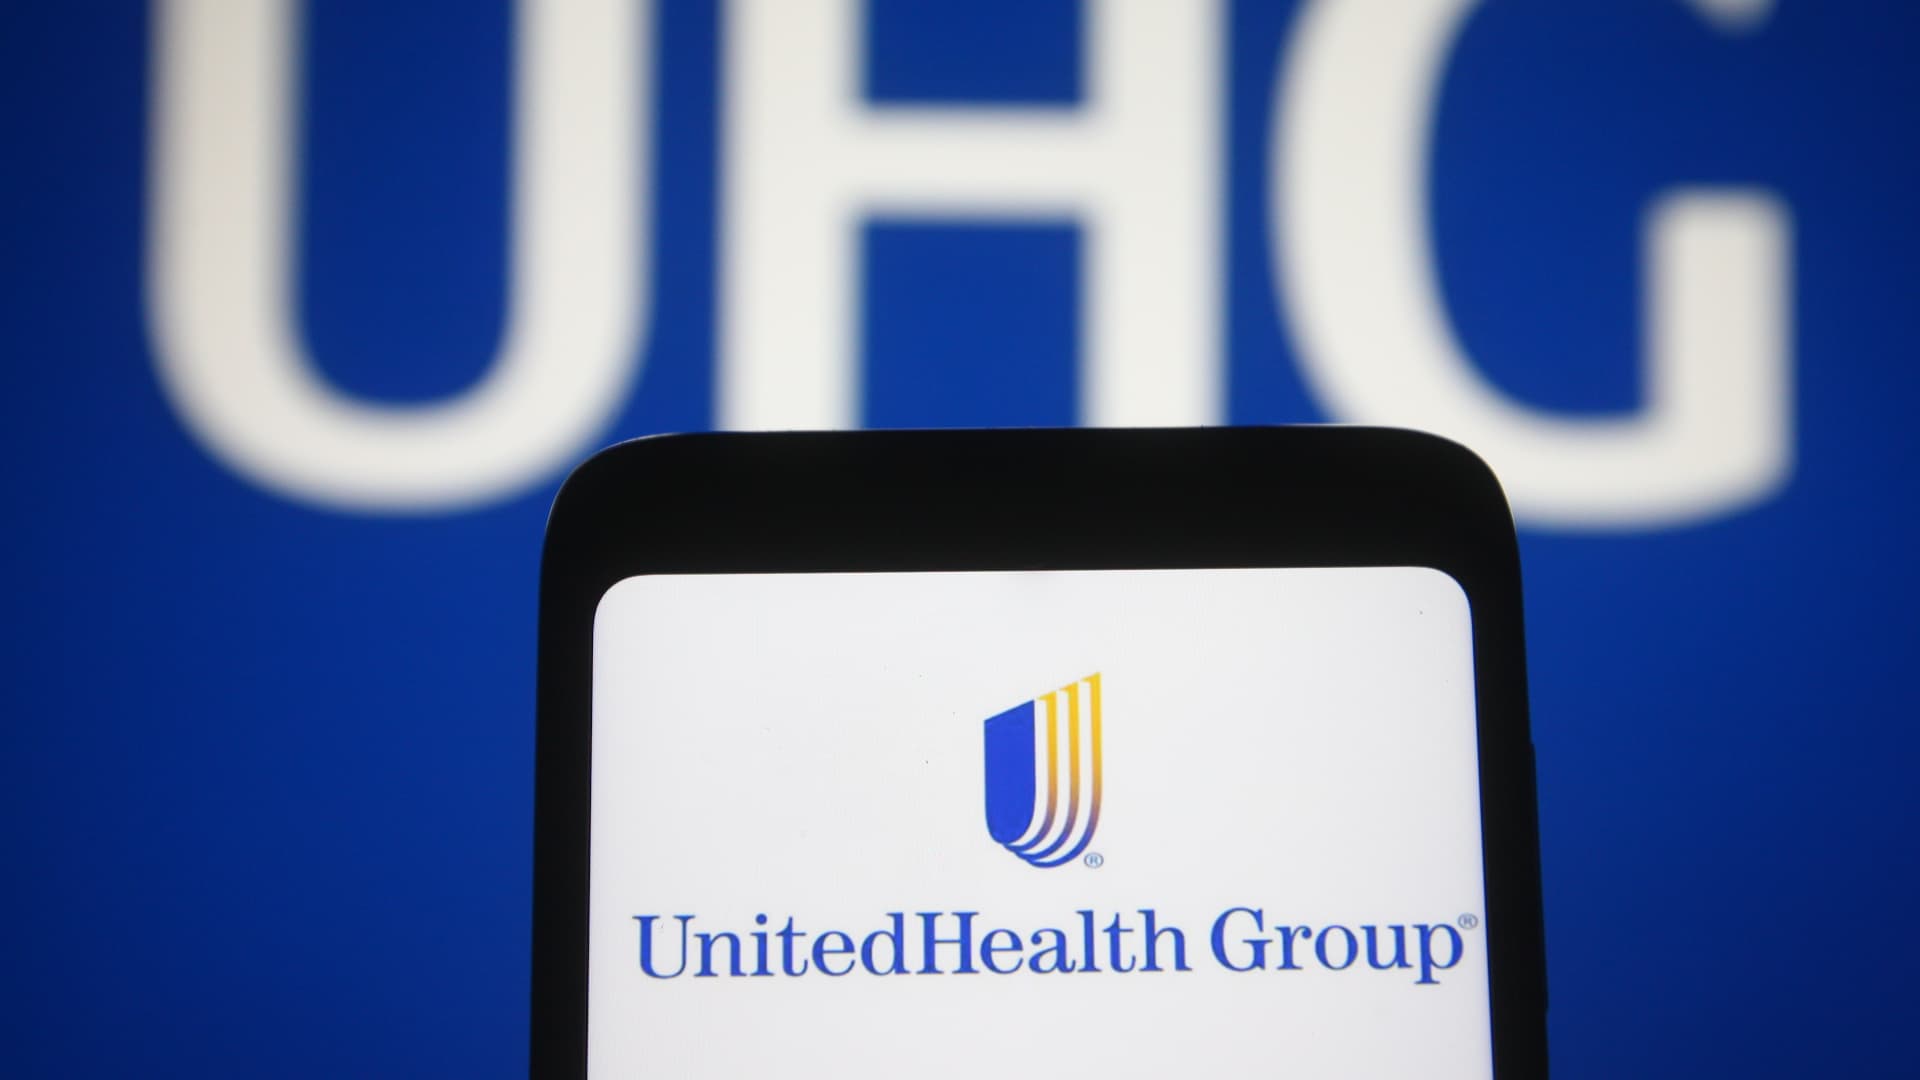 UnitedHealth CEO estimates one-third of Americans could be impacted by Change Healthcare cyberattack - CNBC